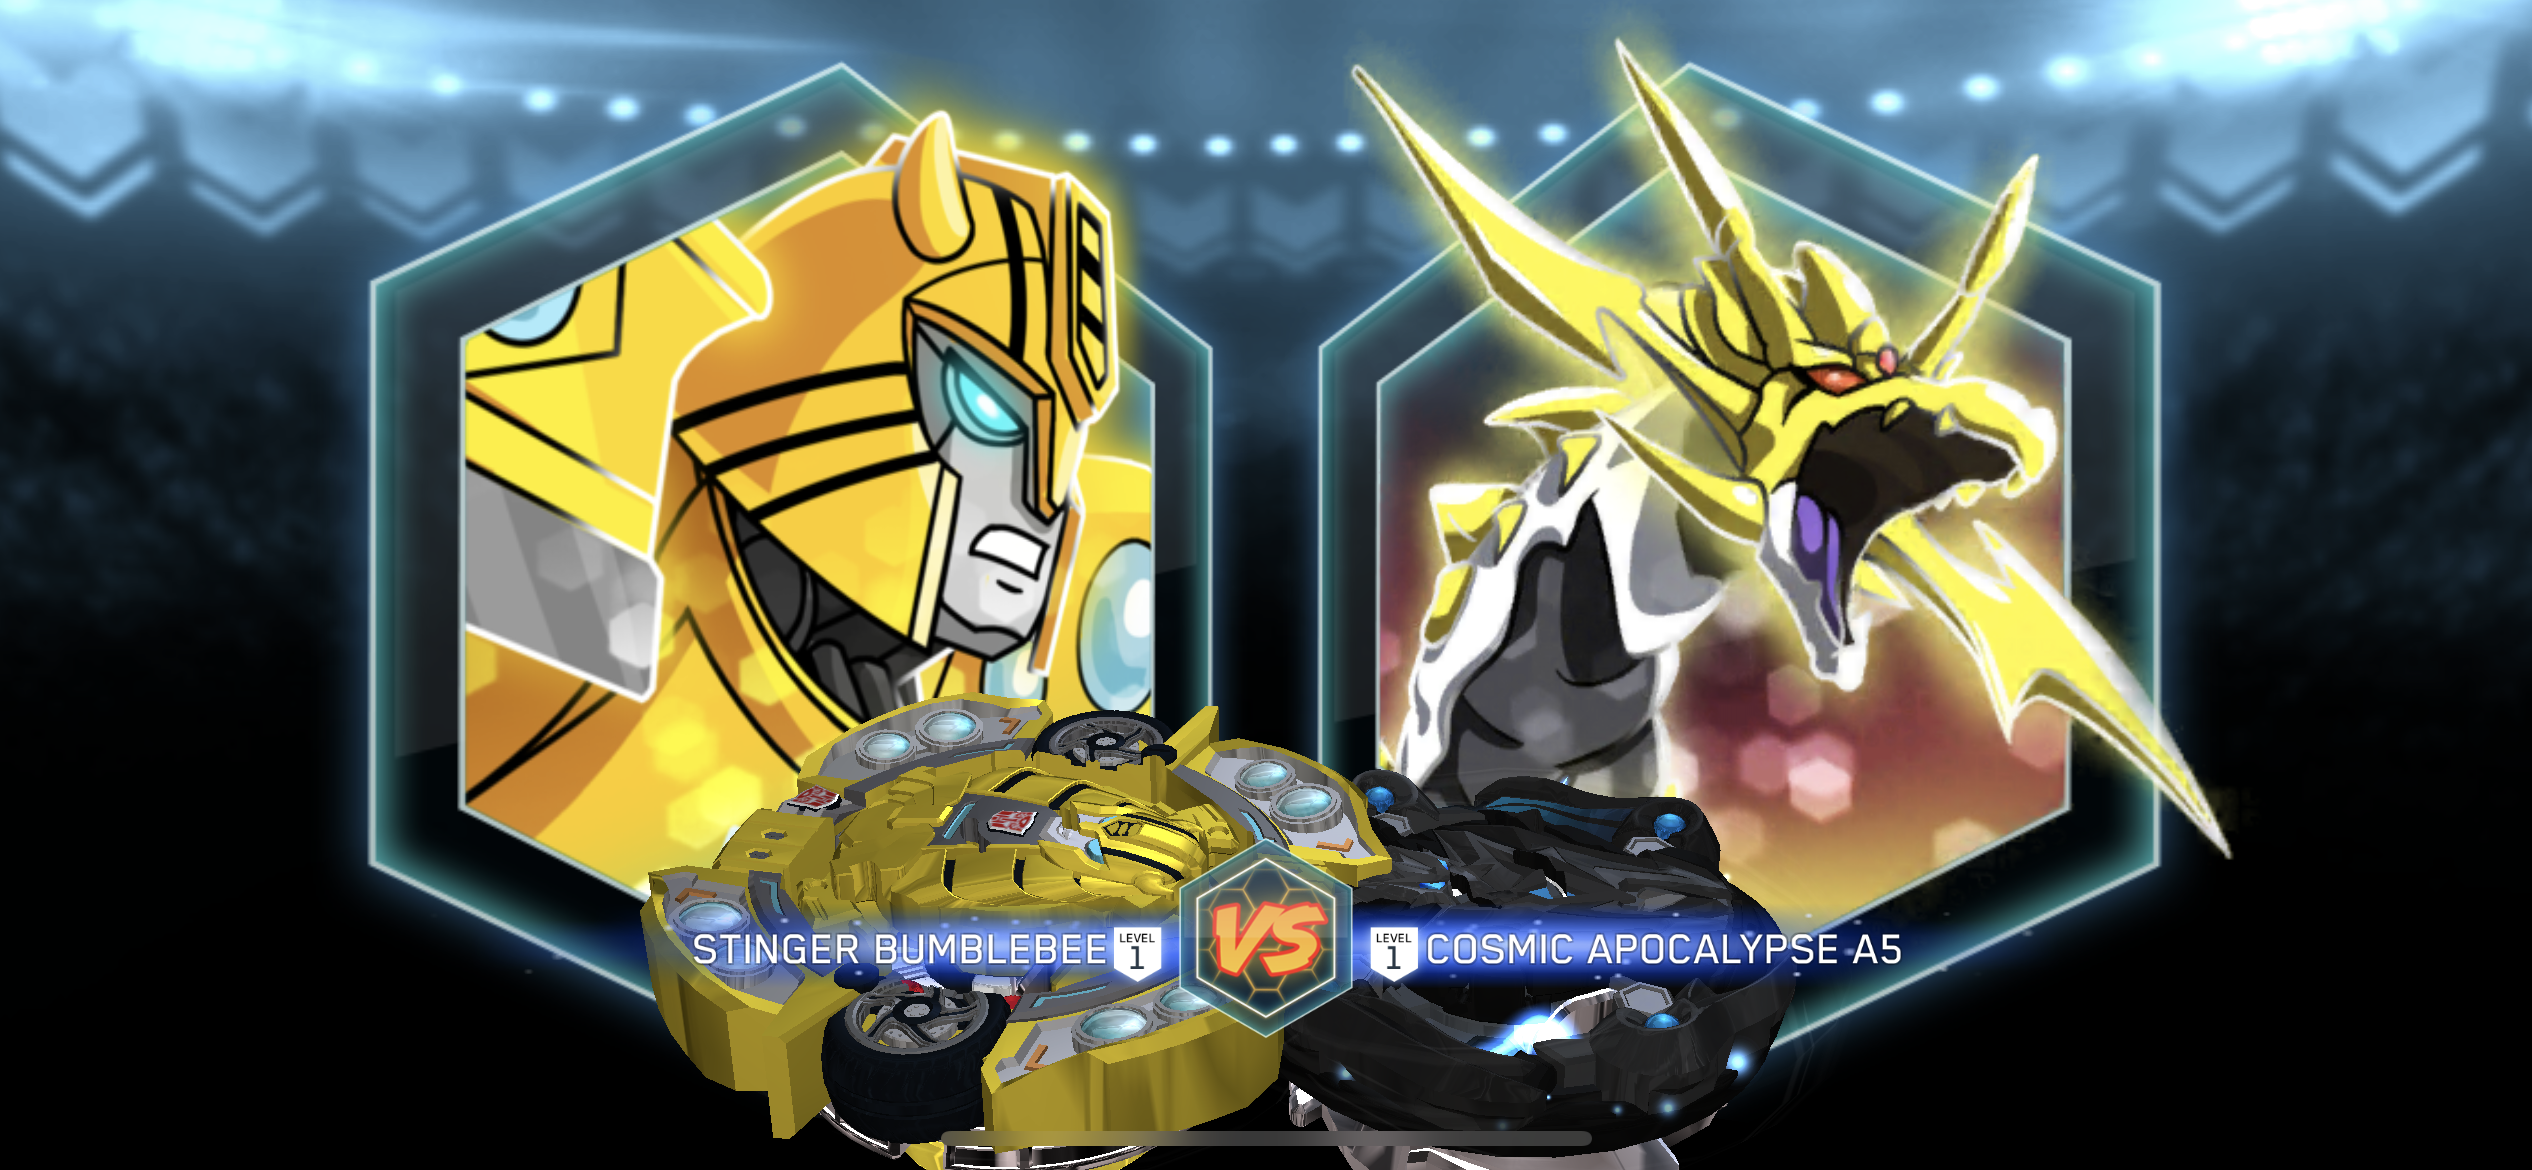 Transformers and Beyblade collide with digital tops